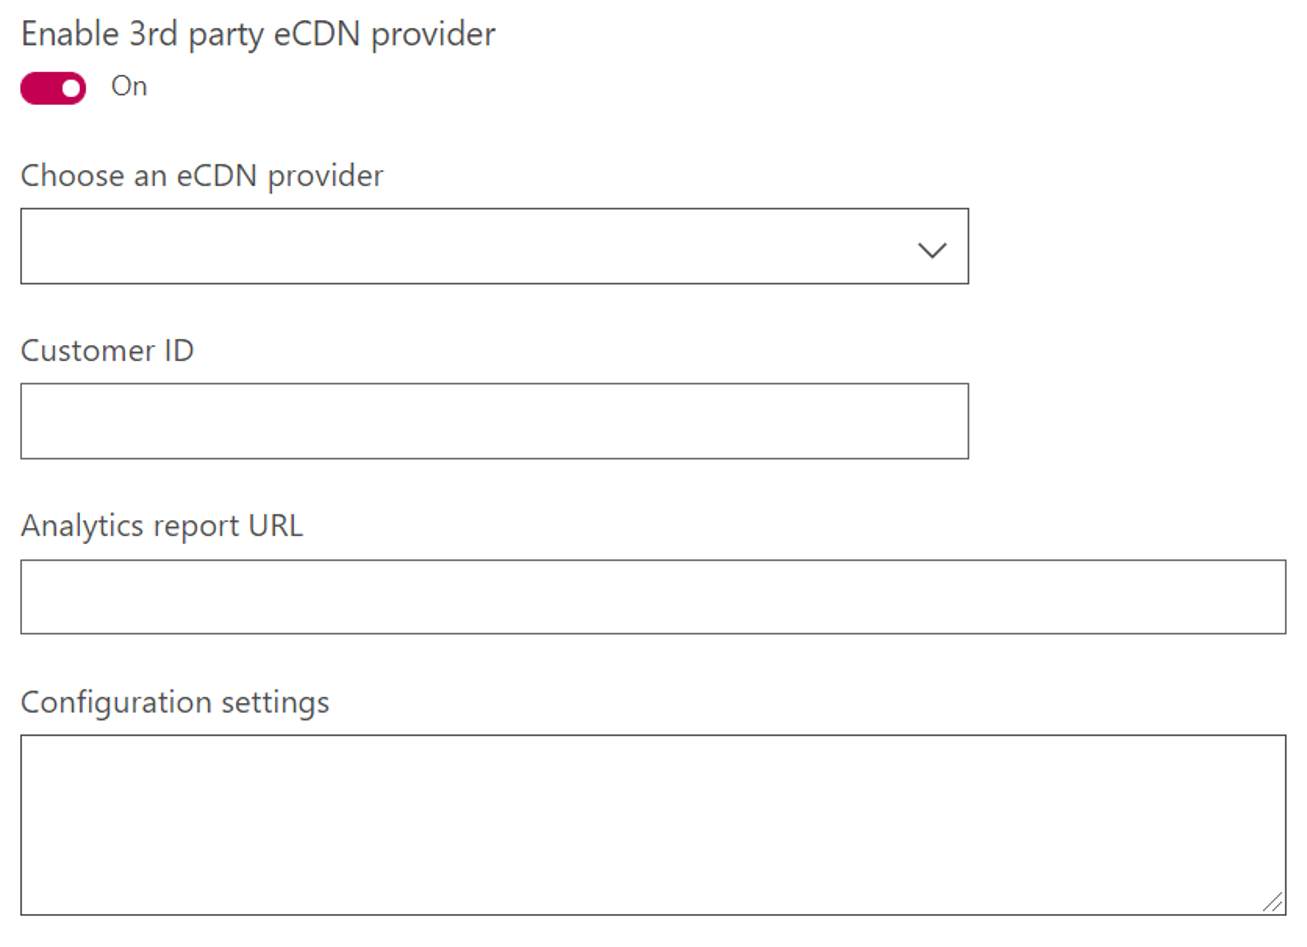 Network caching configuration screen in Stream (Classic) admin settings.